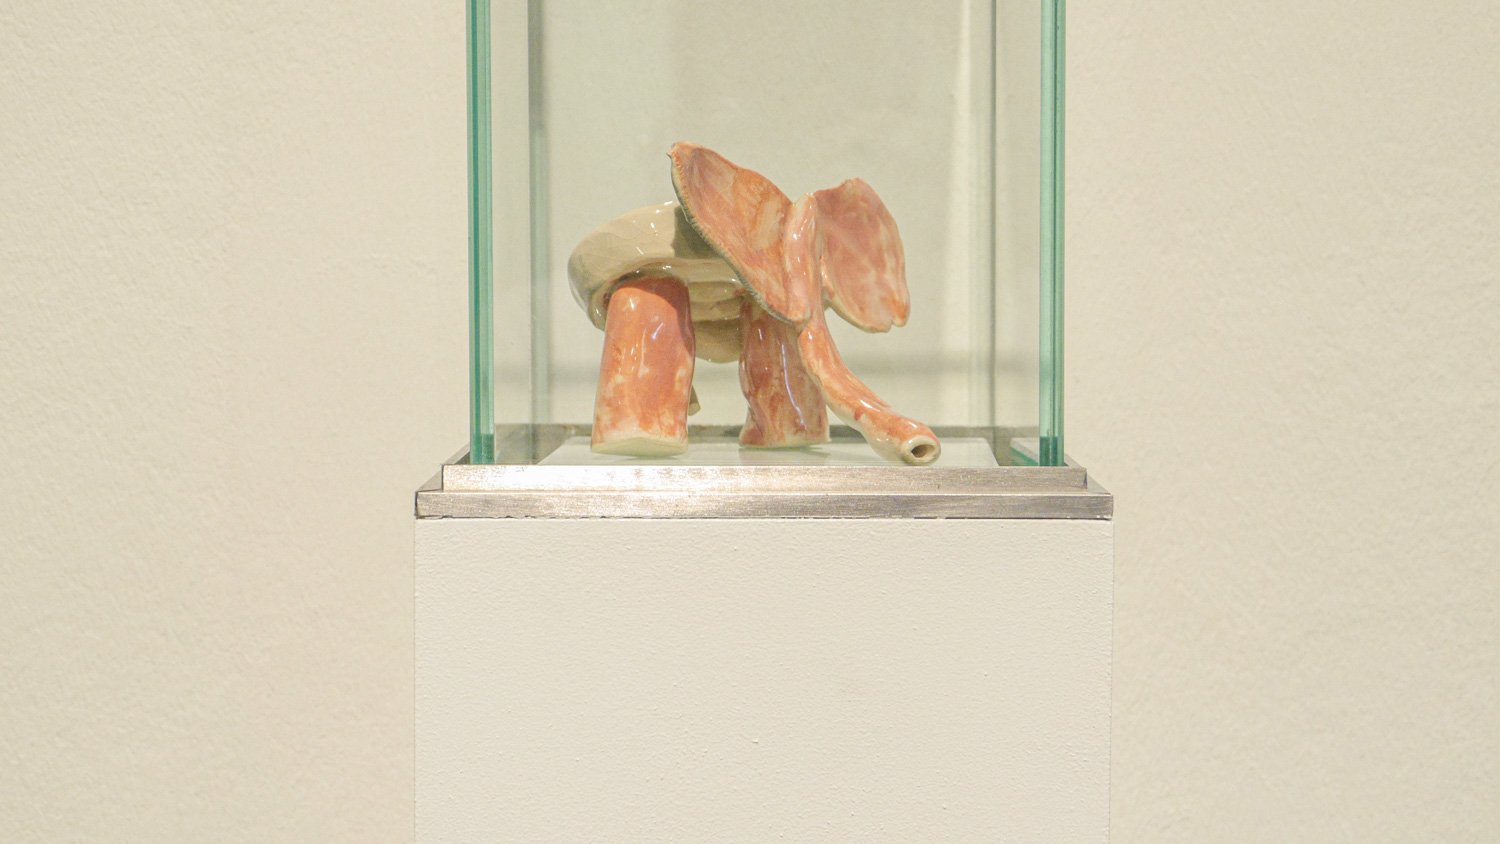 Detail View Elephants in the room, painted ceramics, dimensions variable, 2017